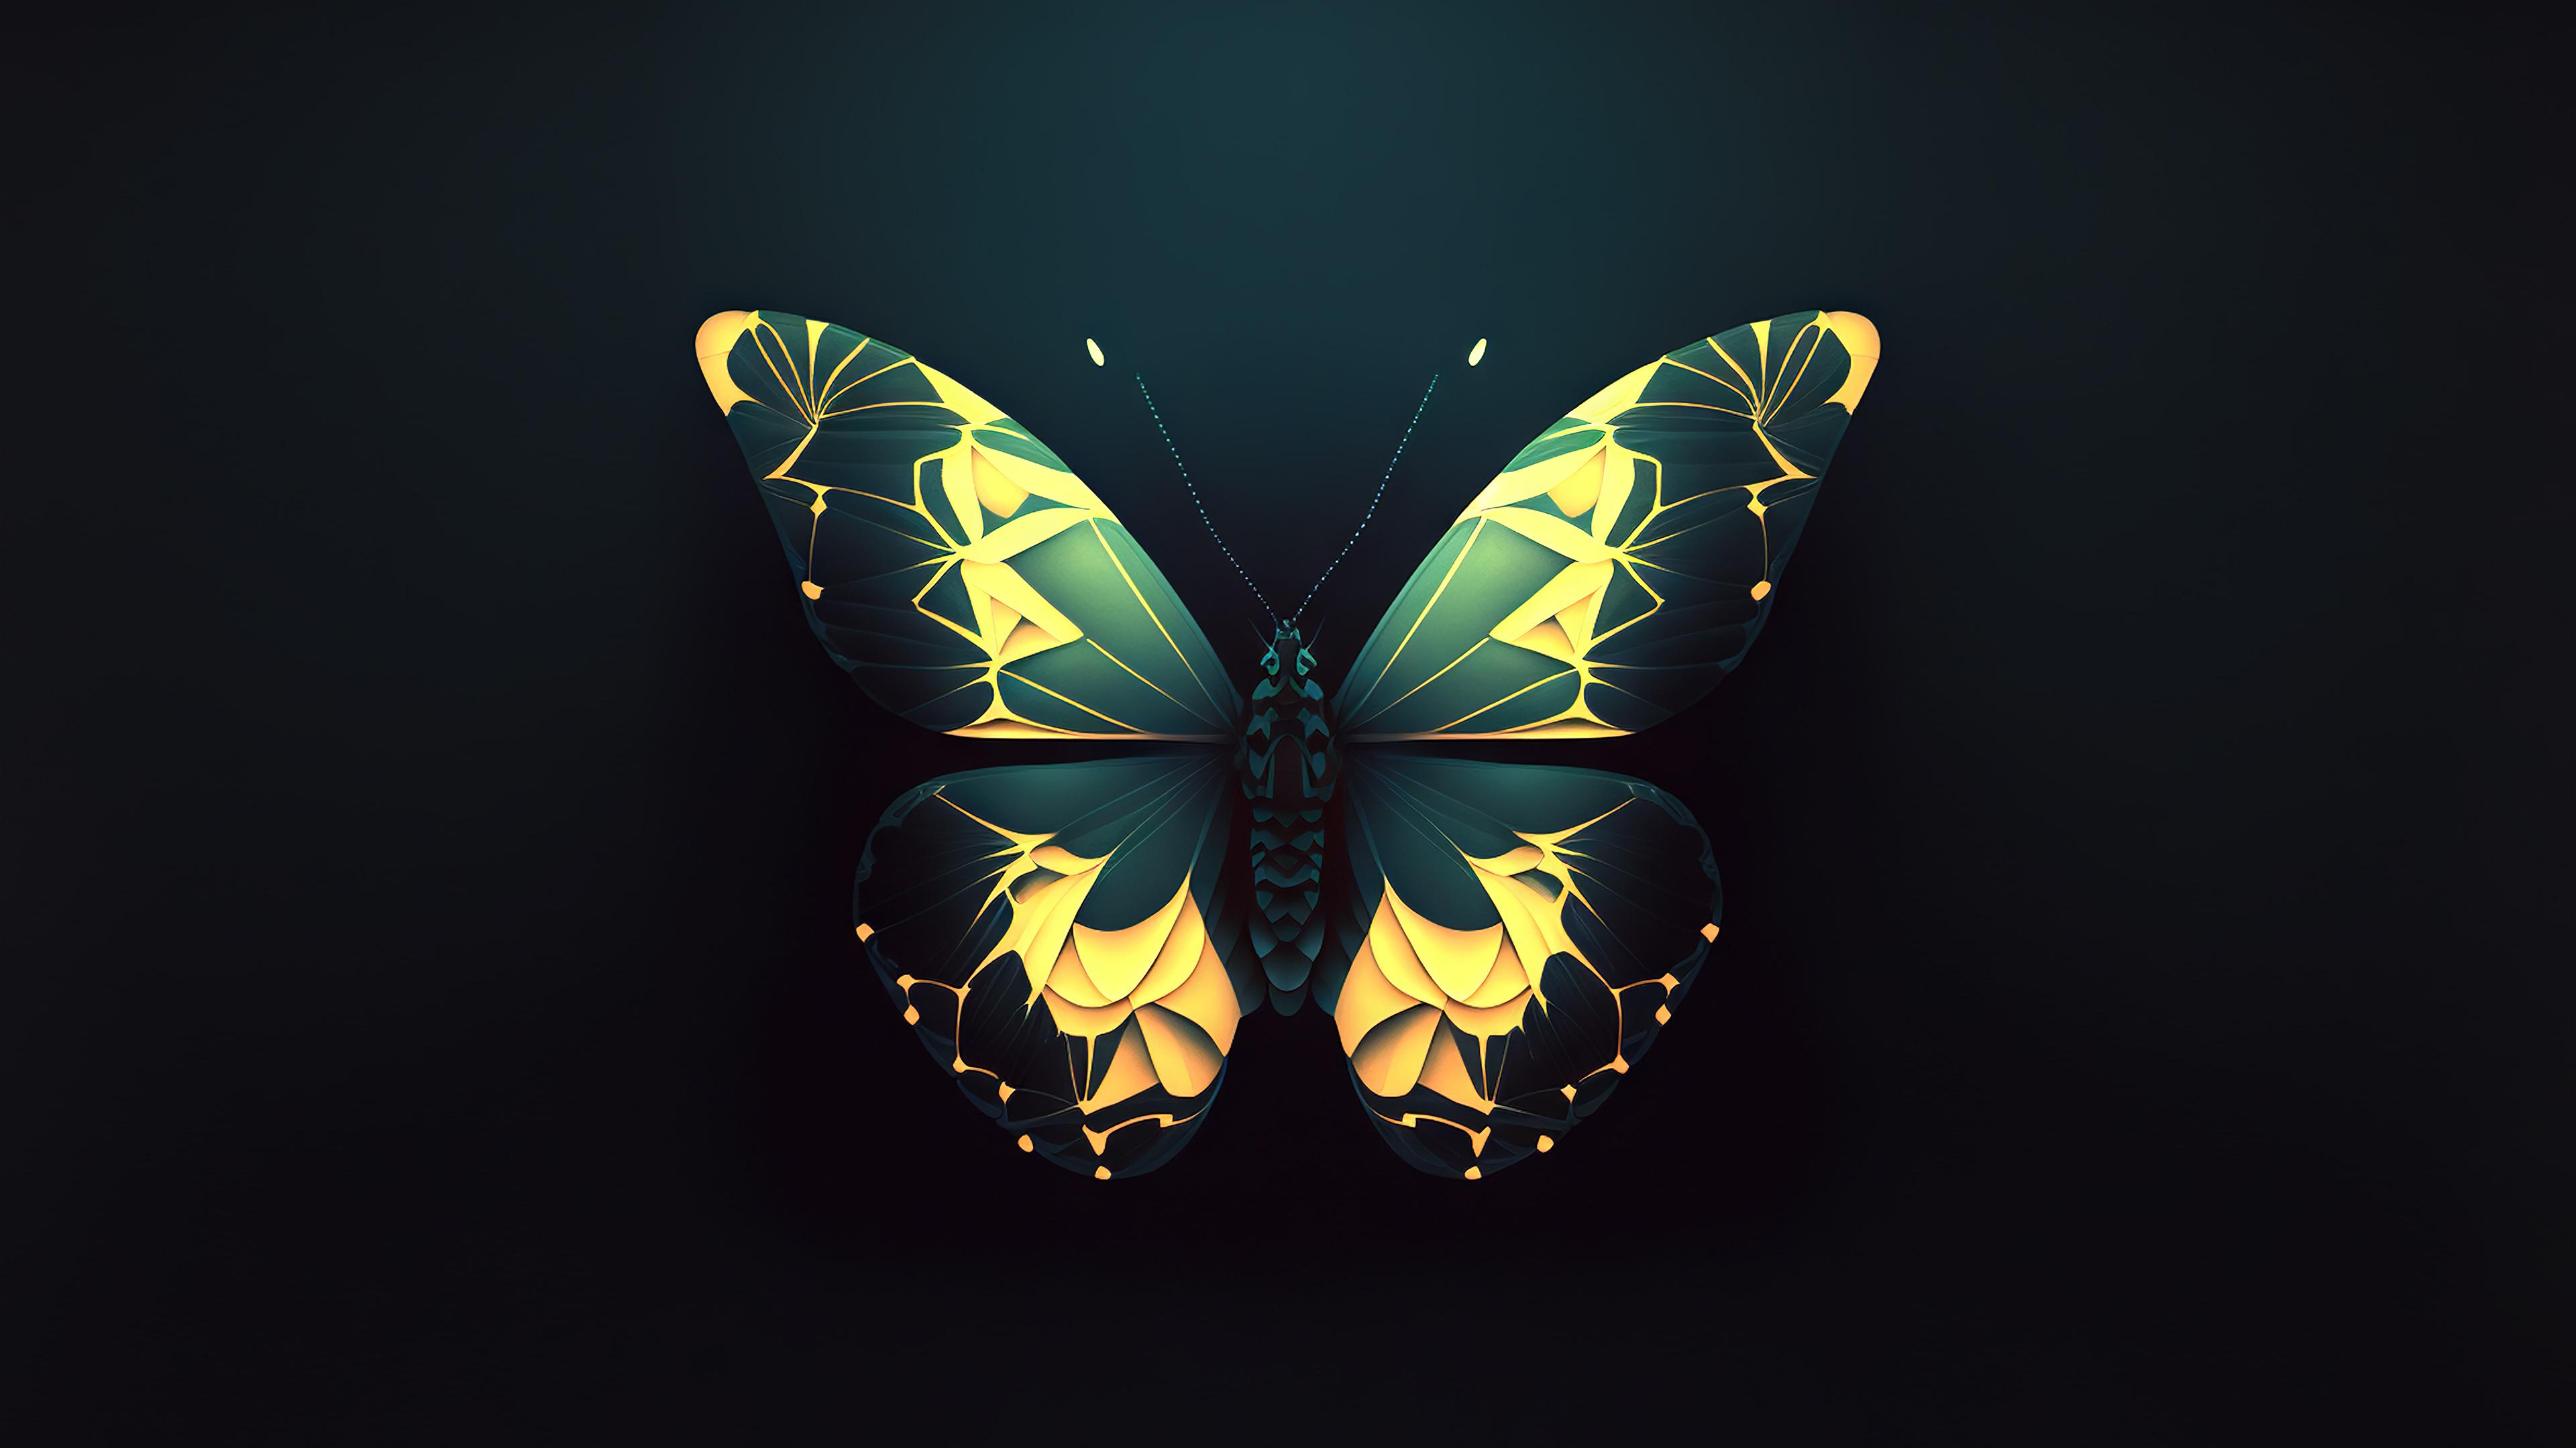 Butterfly Insect Abstract Digital Art Wallpaper 4k HD Pc 990i